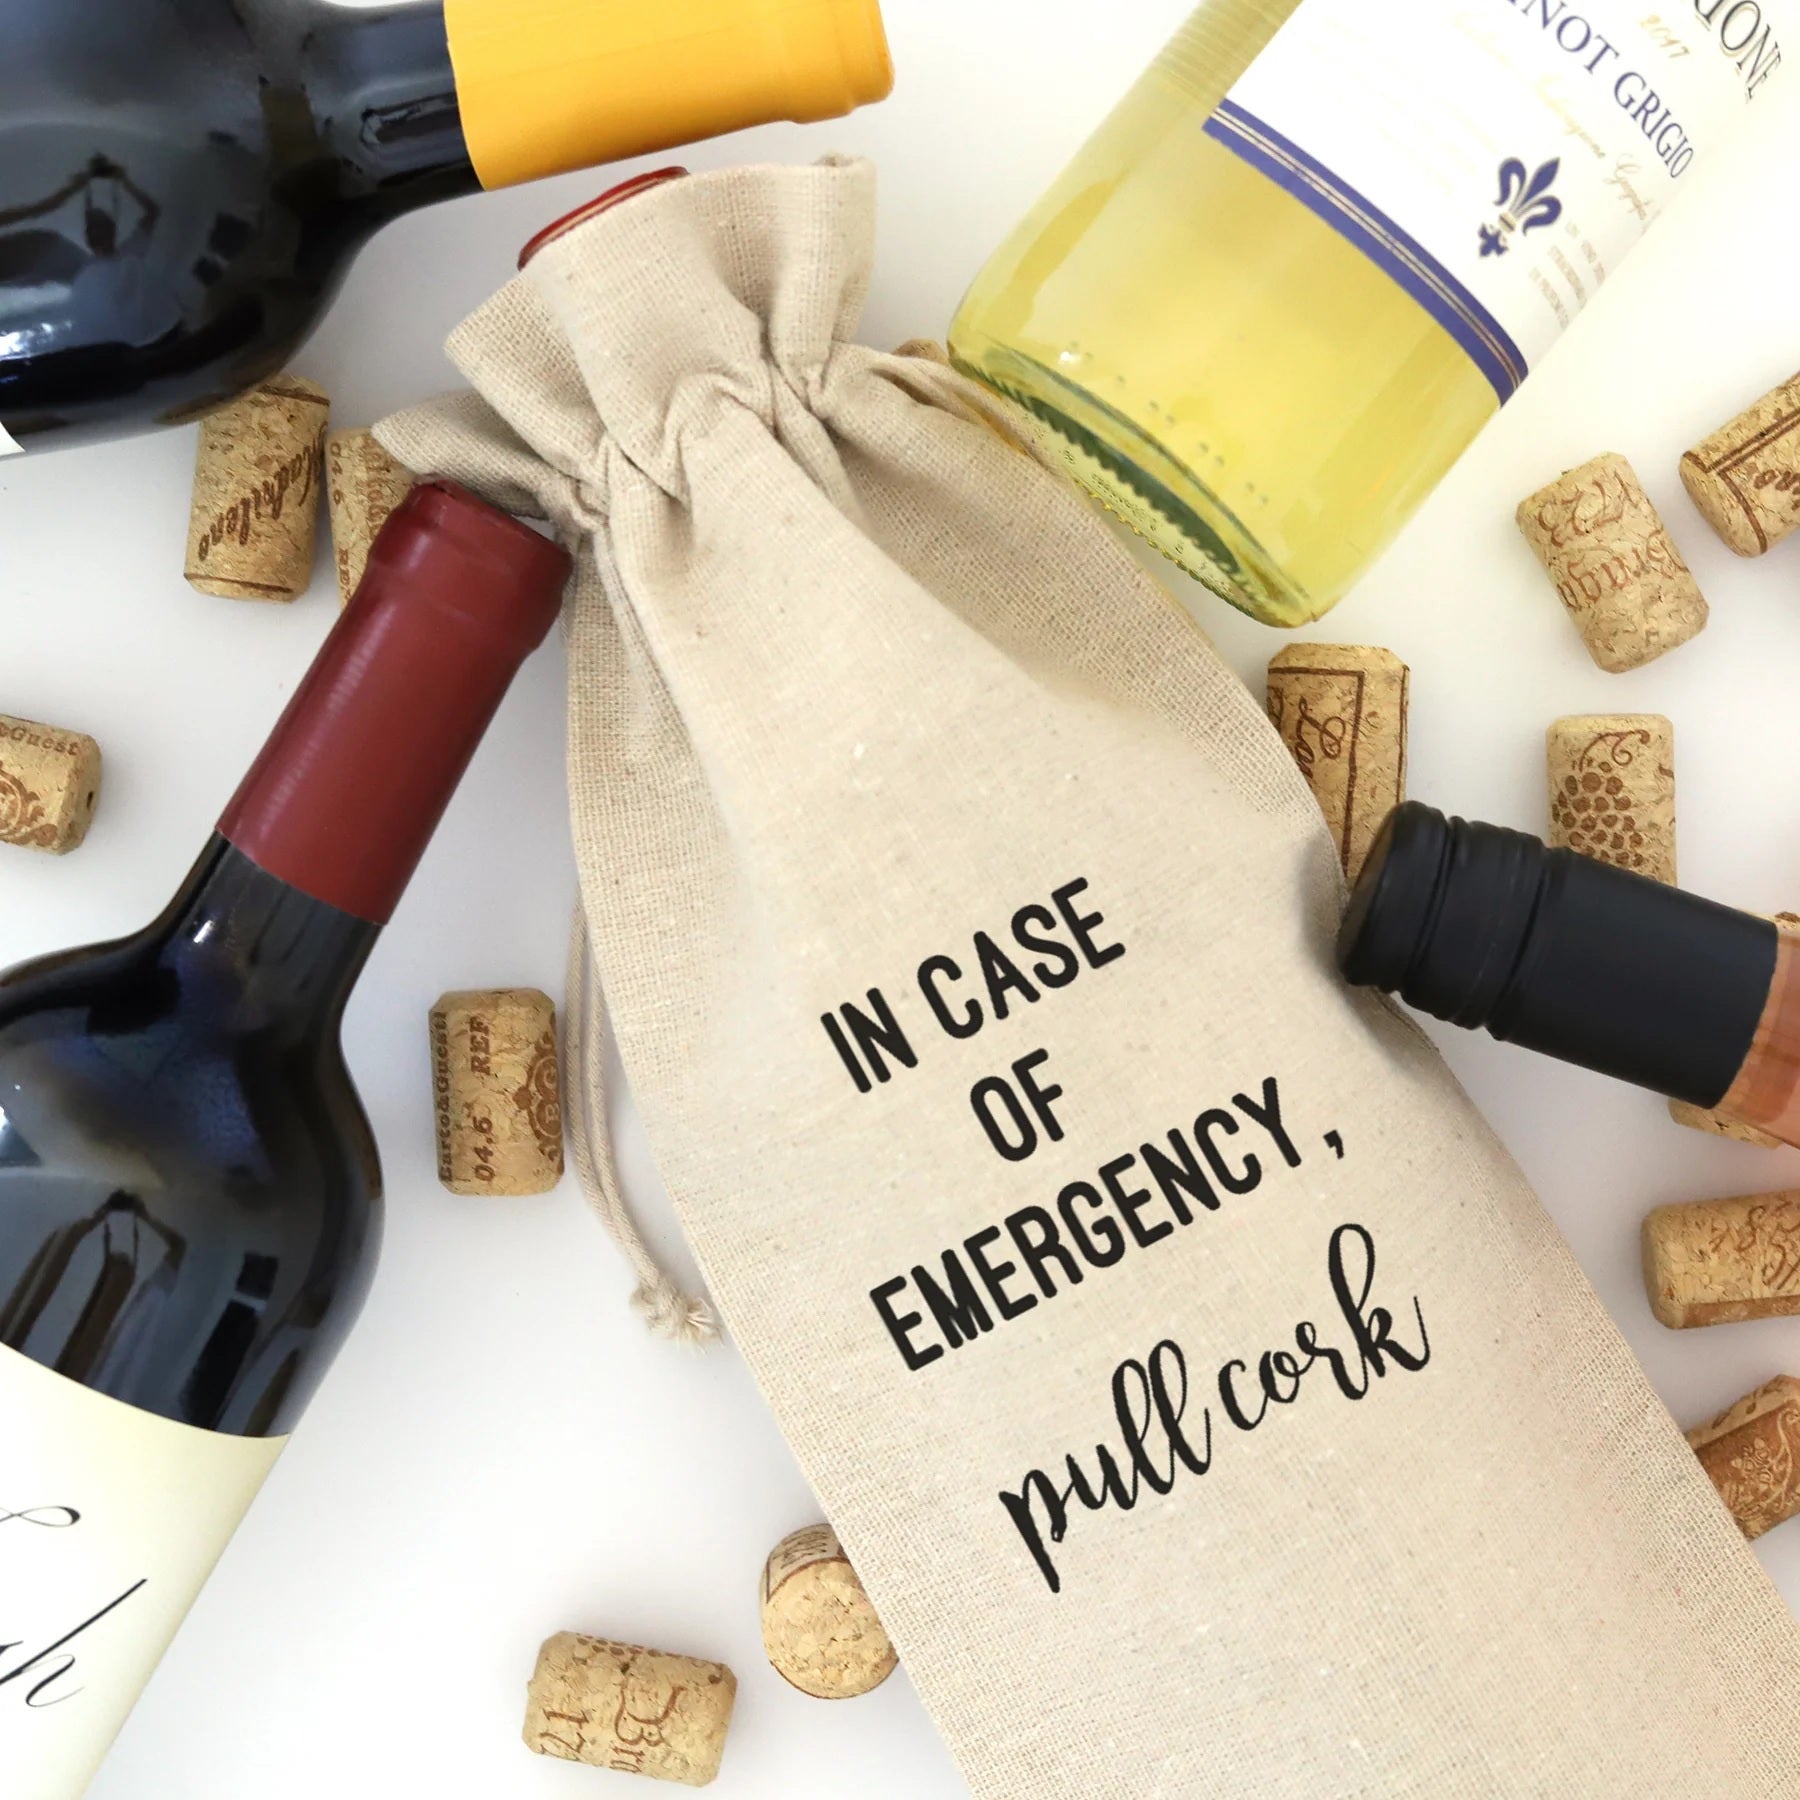 A wine bag with the words "In case of emergency, pull cork" printed on it.